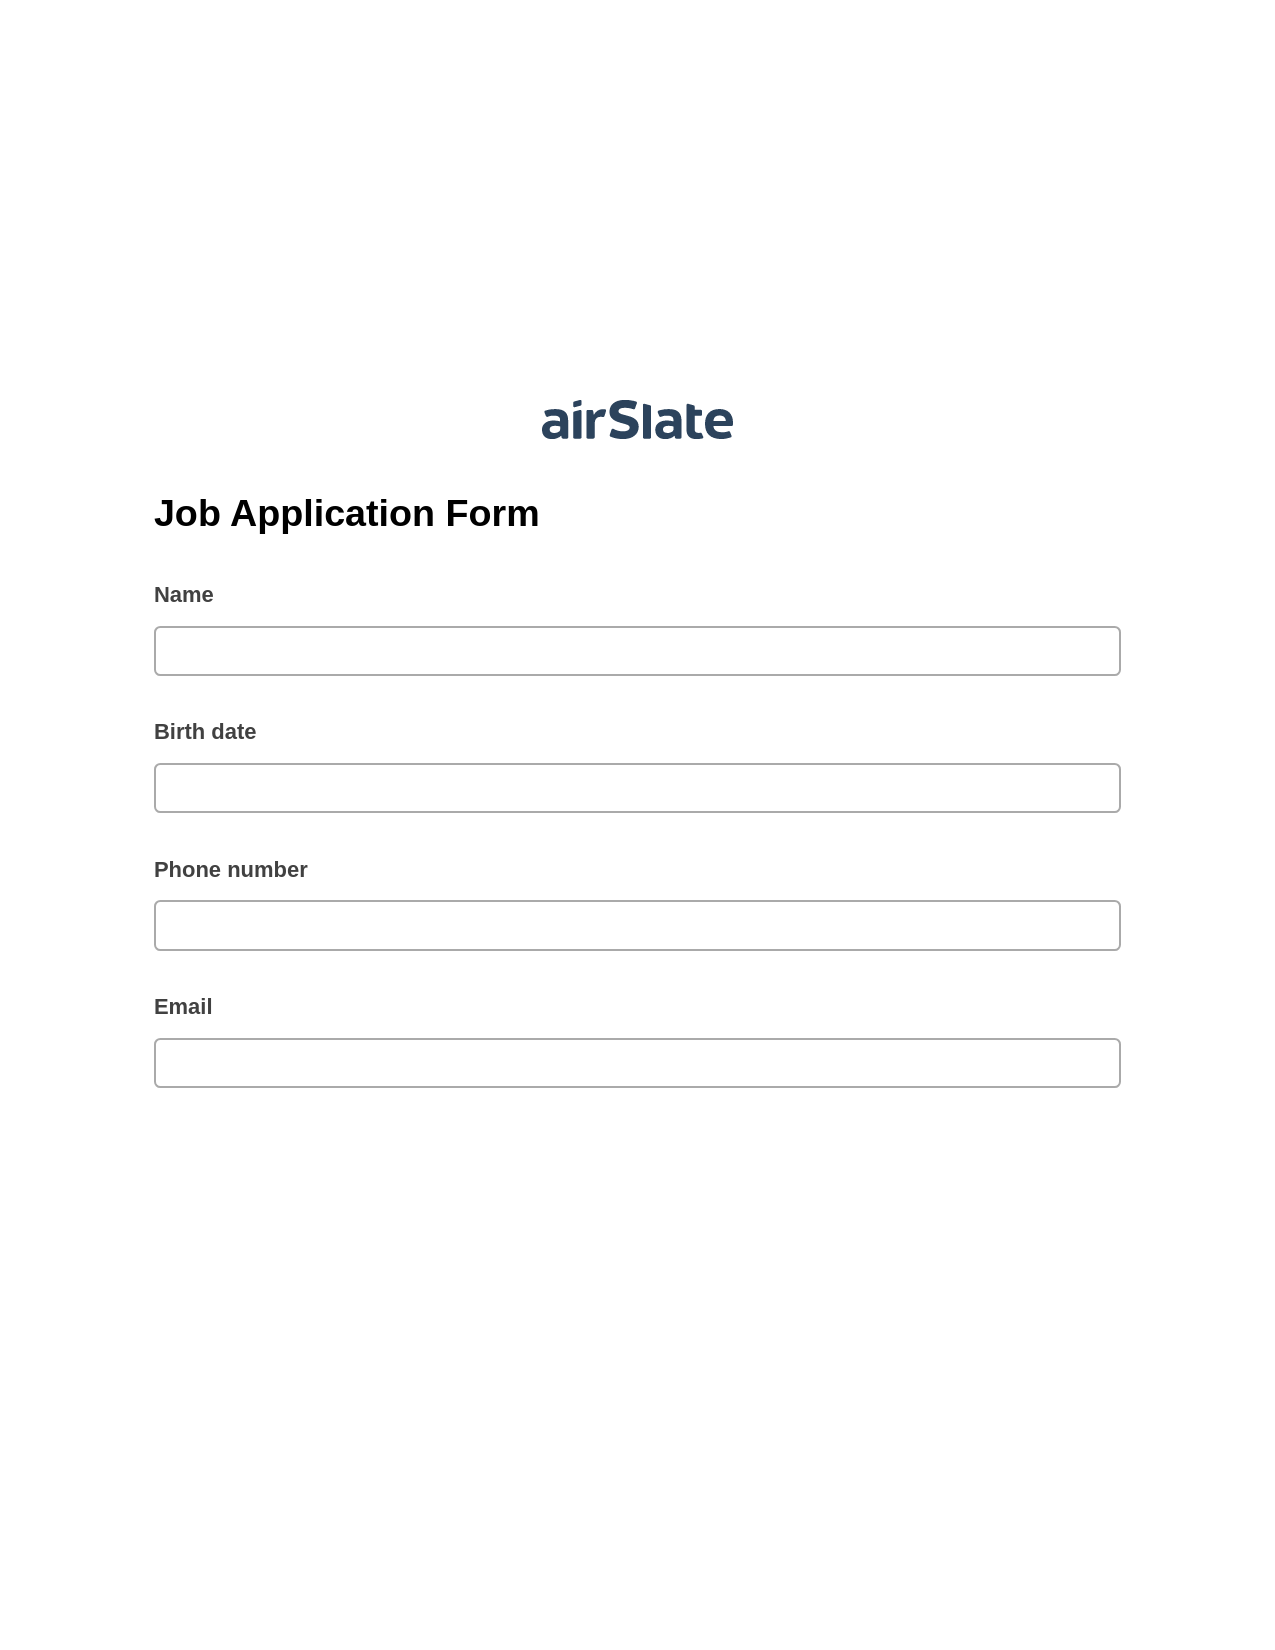 Job Application Form Pre-fill from Excel Spreadsheet Bot, Export to MS Dynamics 365 Bot, Archive to SharePoint Folder Bot